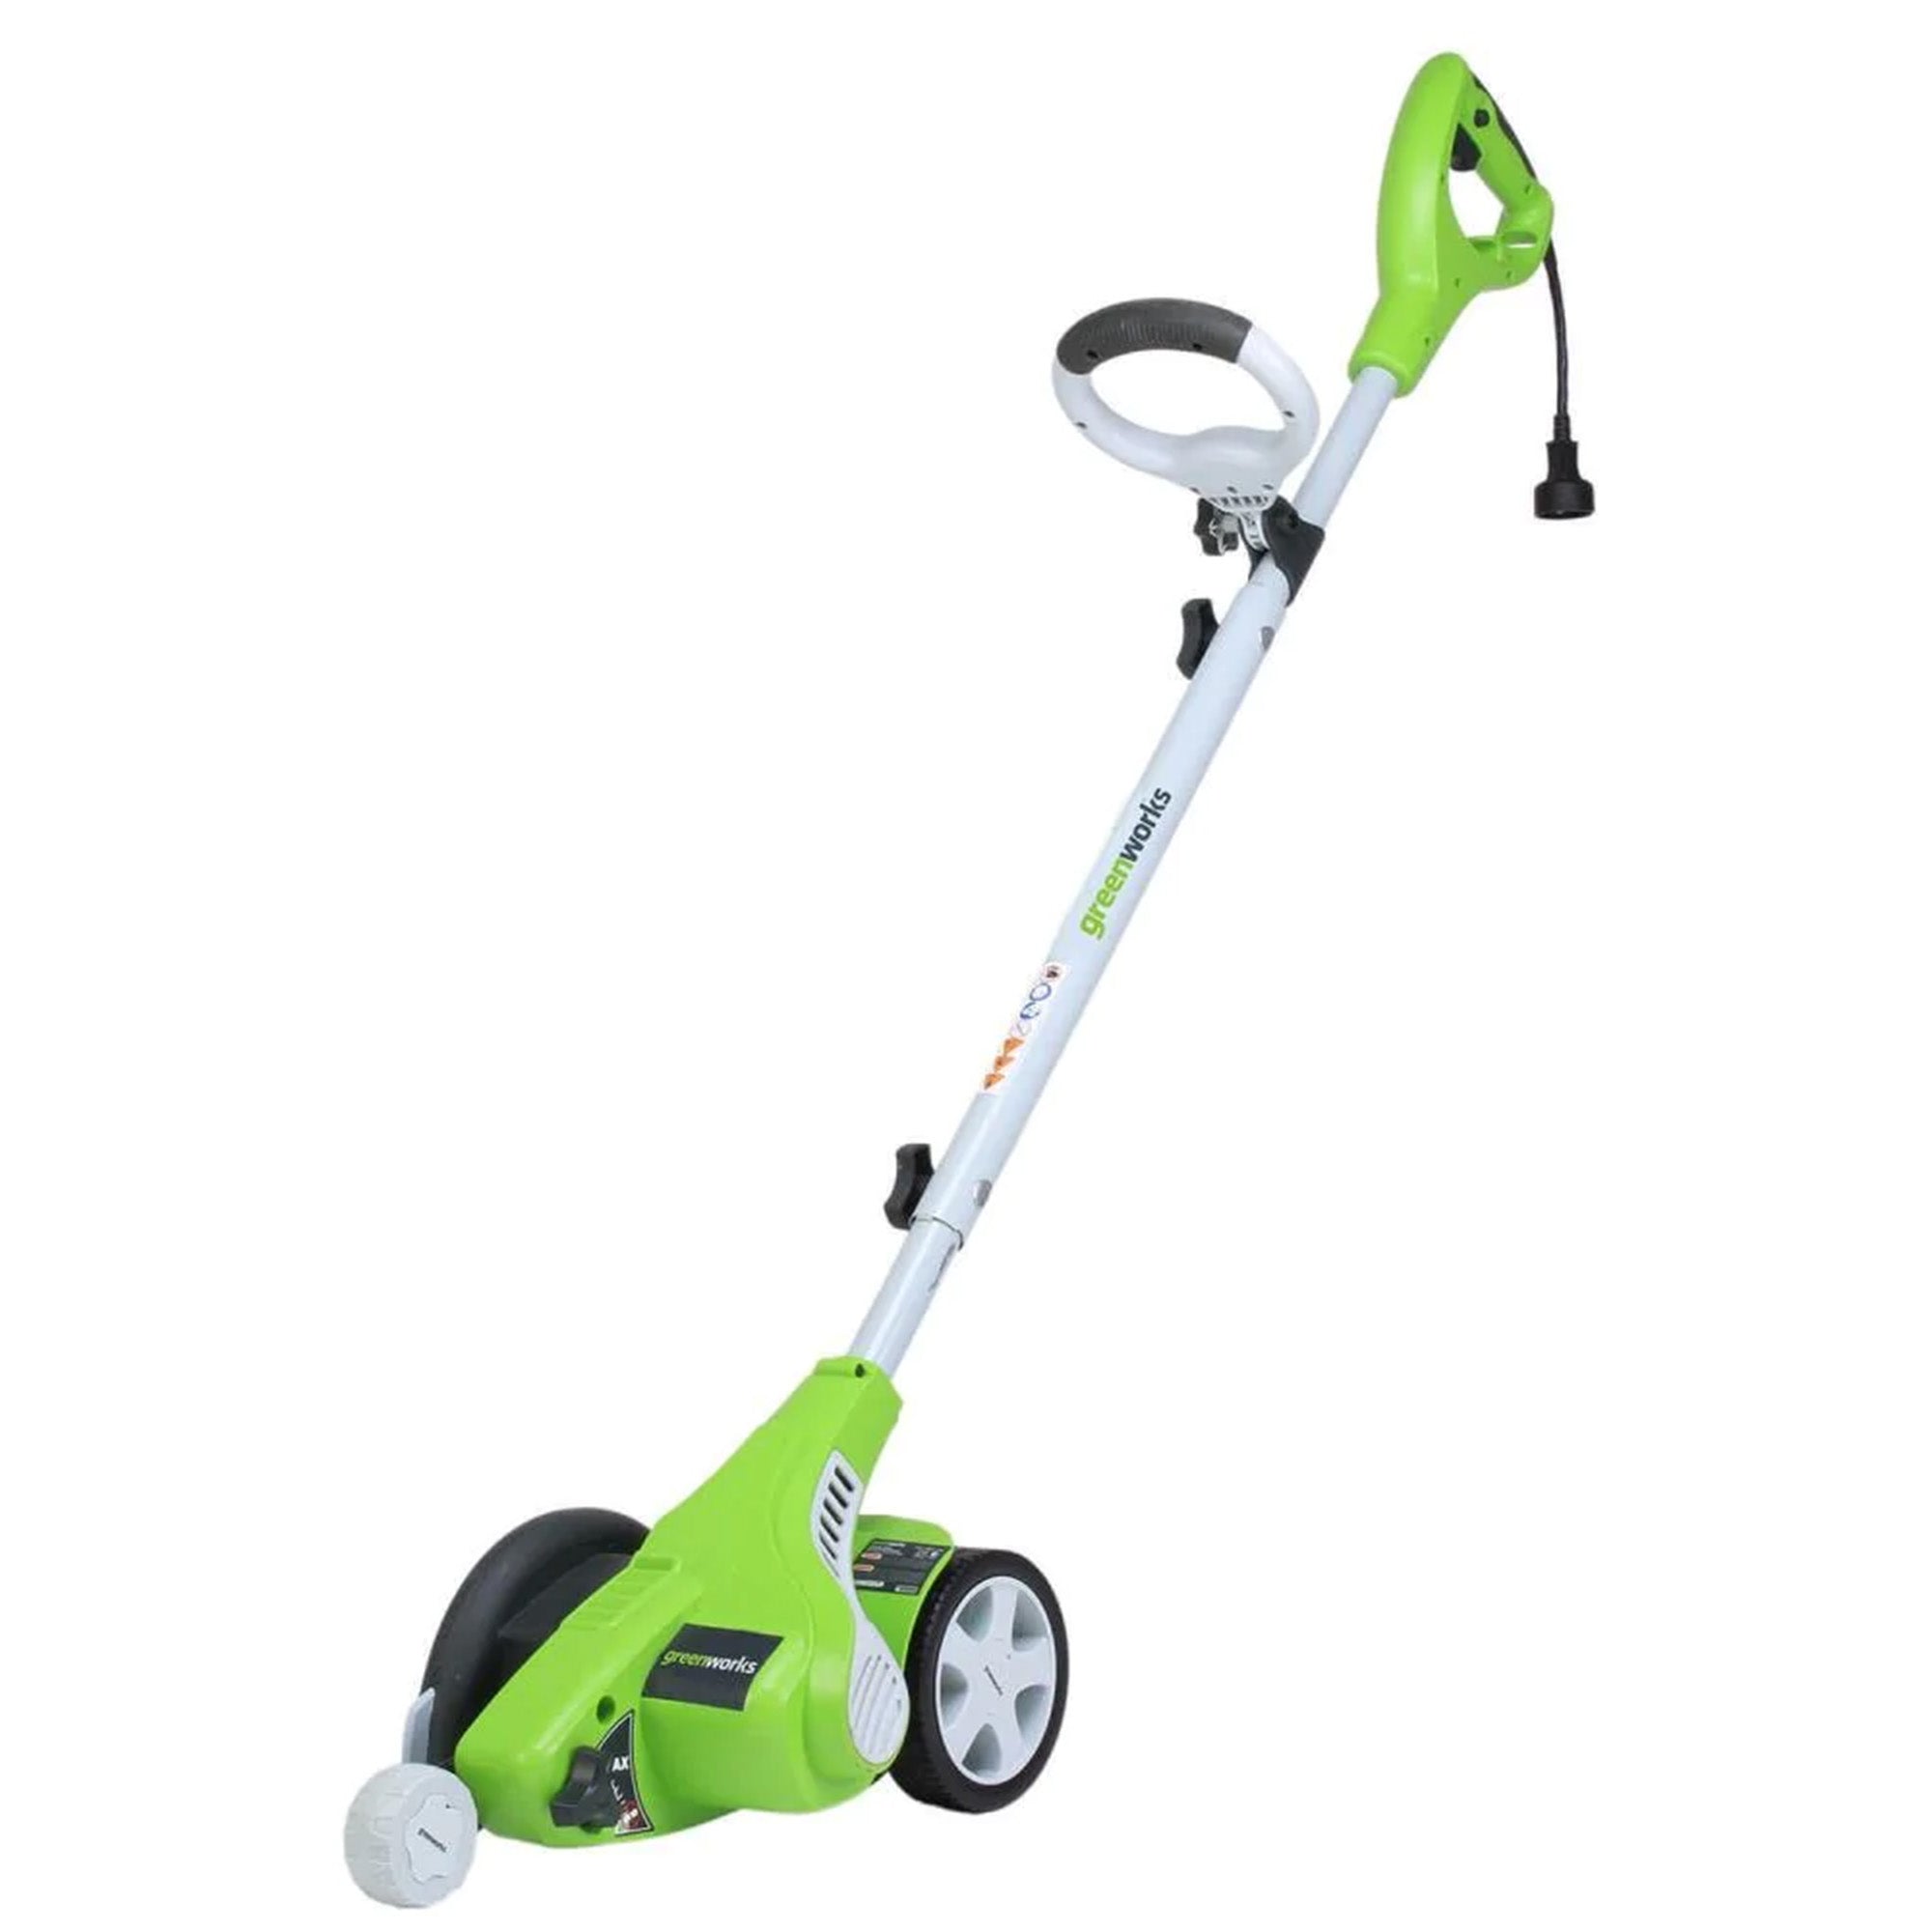 Image of Greenworks 12 Amp Electric Corded Lawn Edger